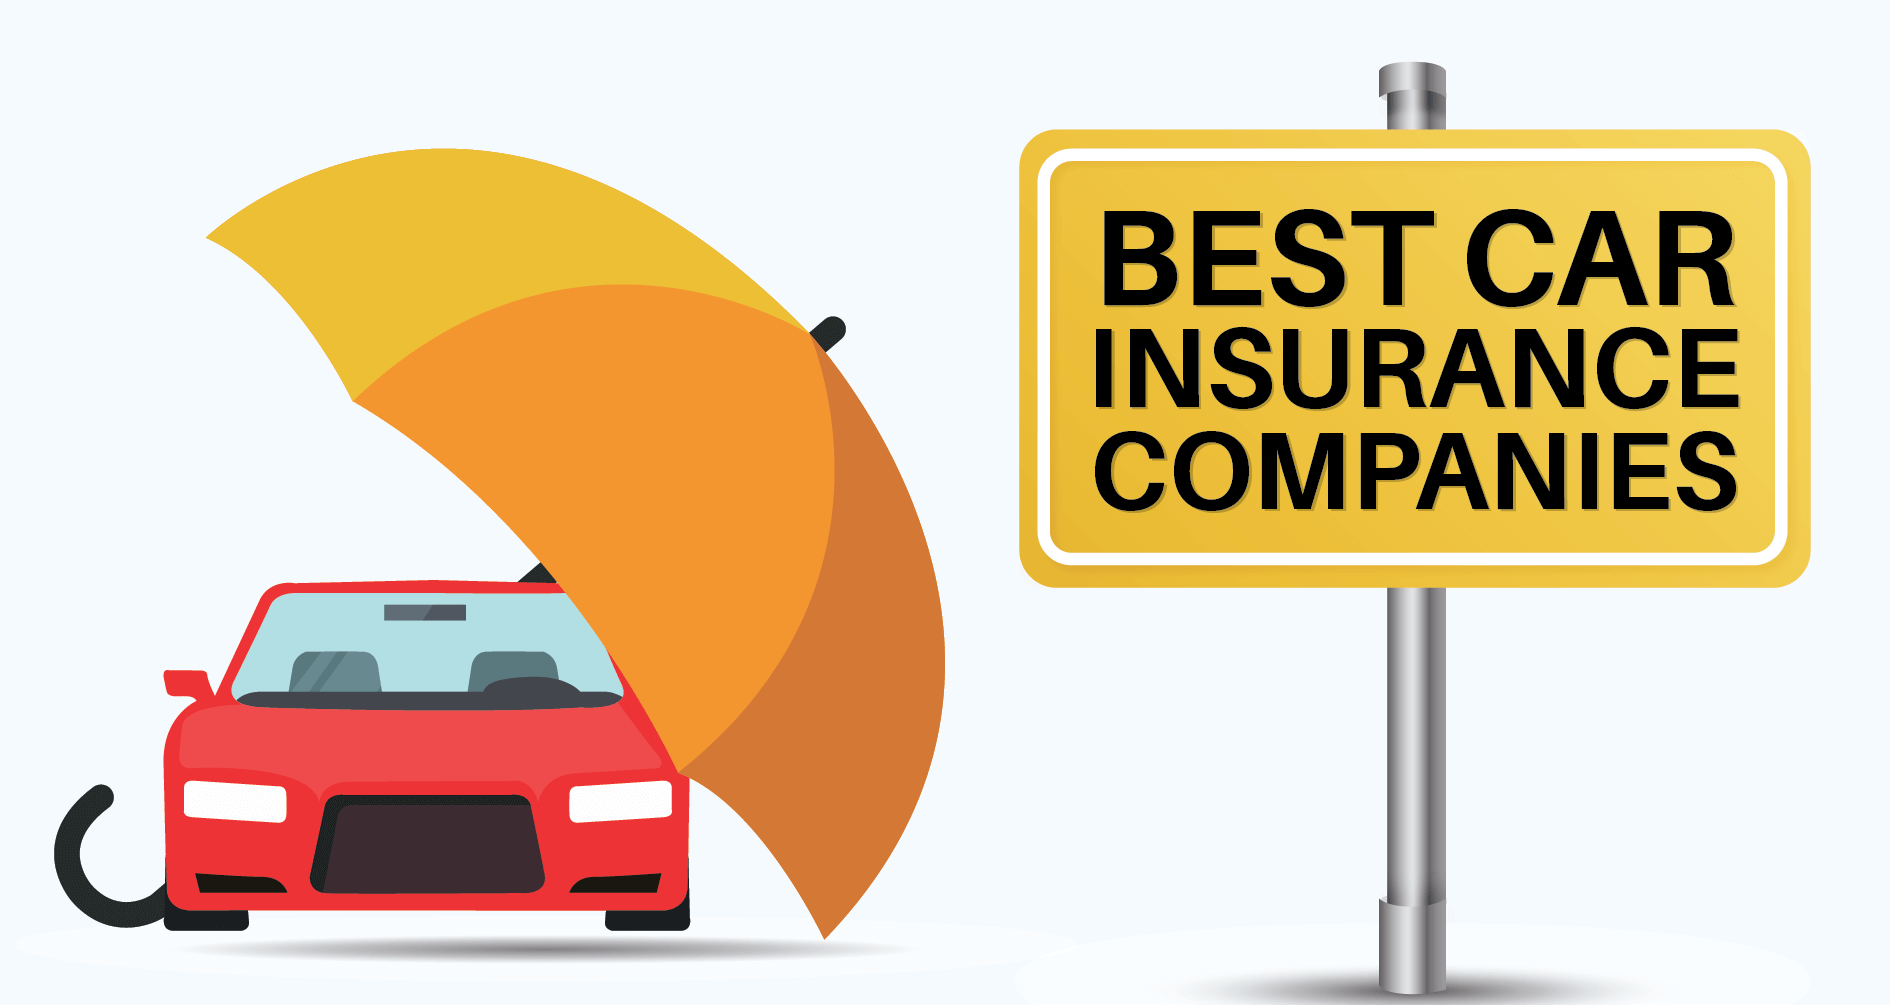 Best Car Insurance Companies In India With The Most Users Oakshire Financial